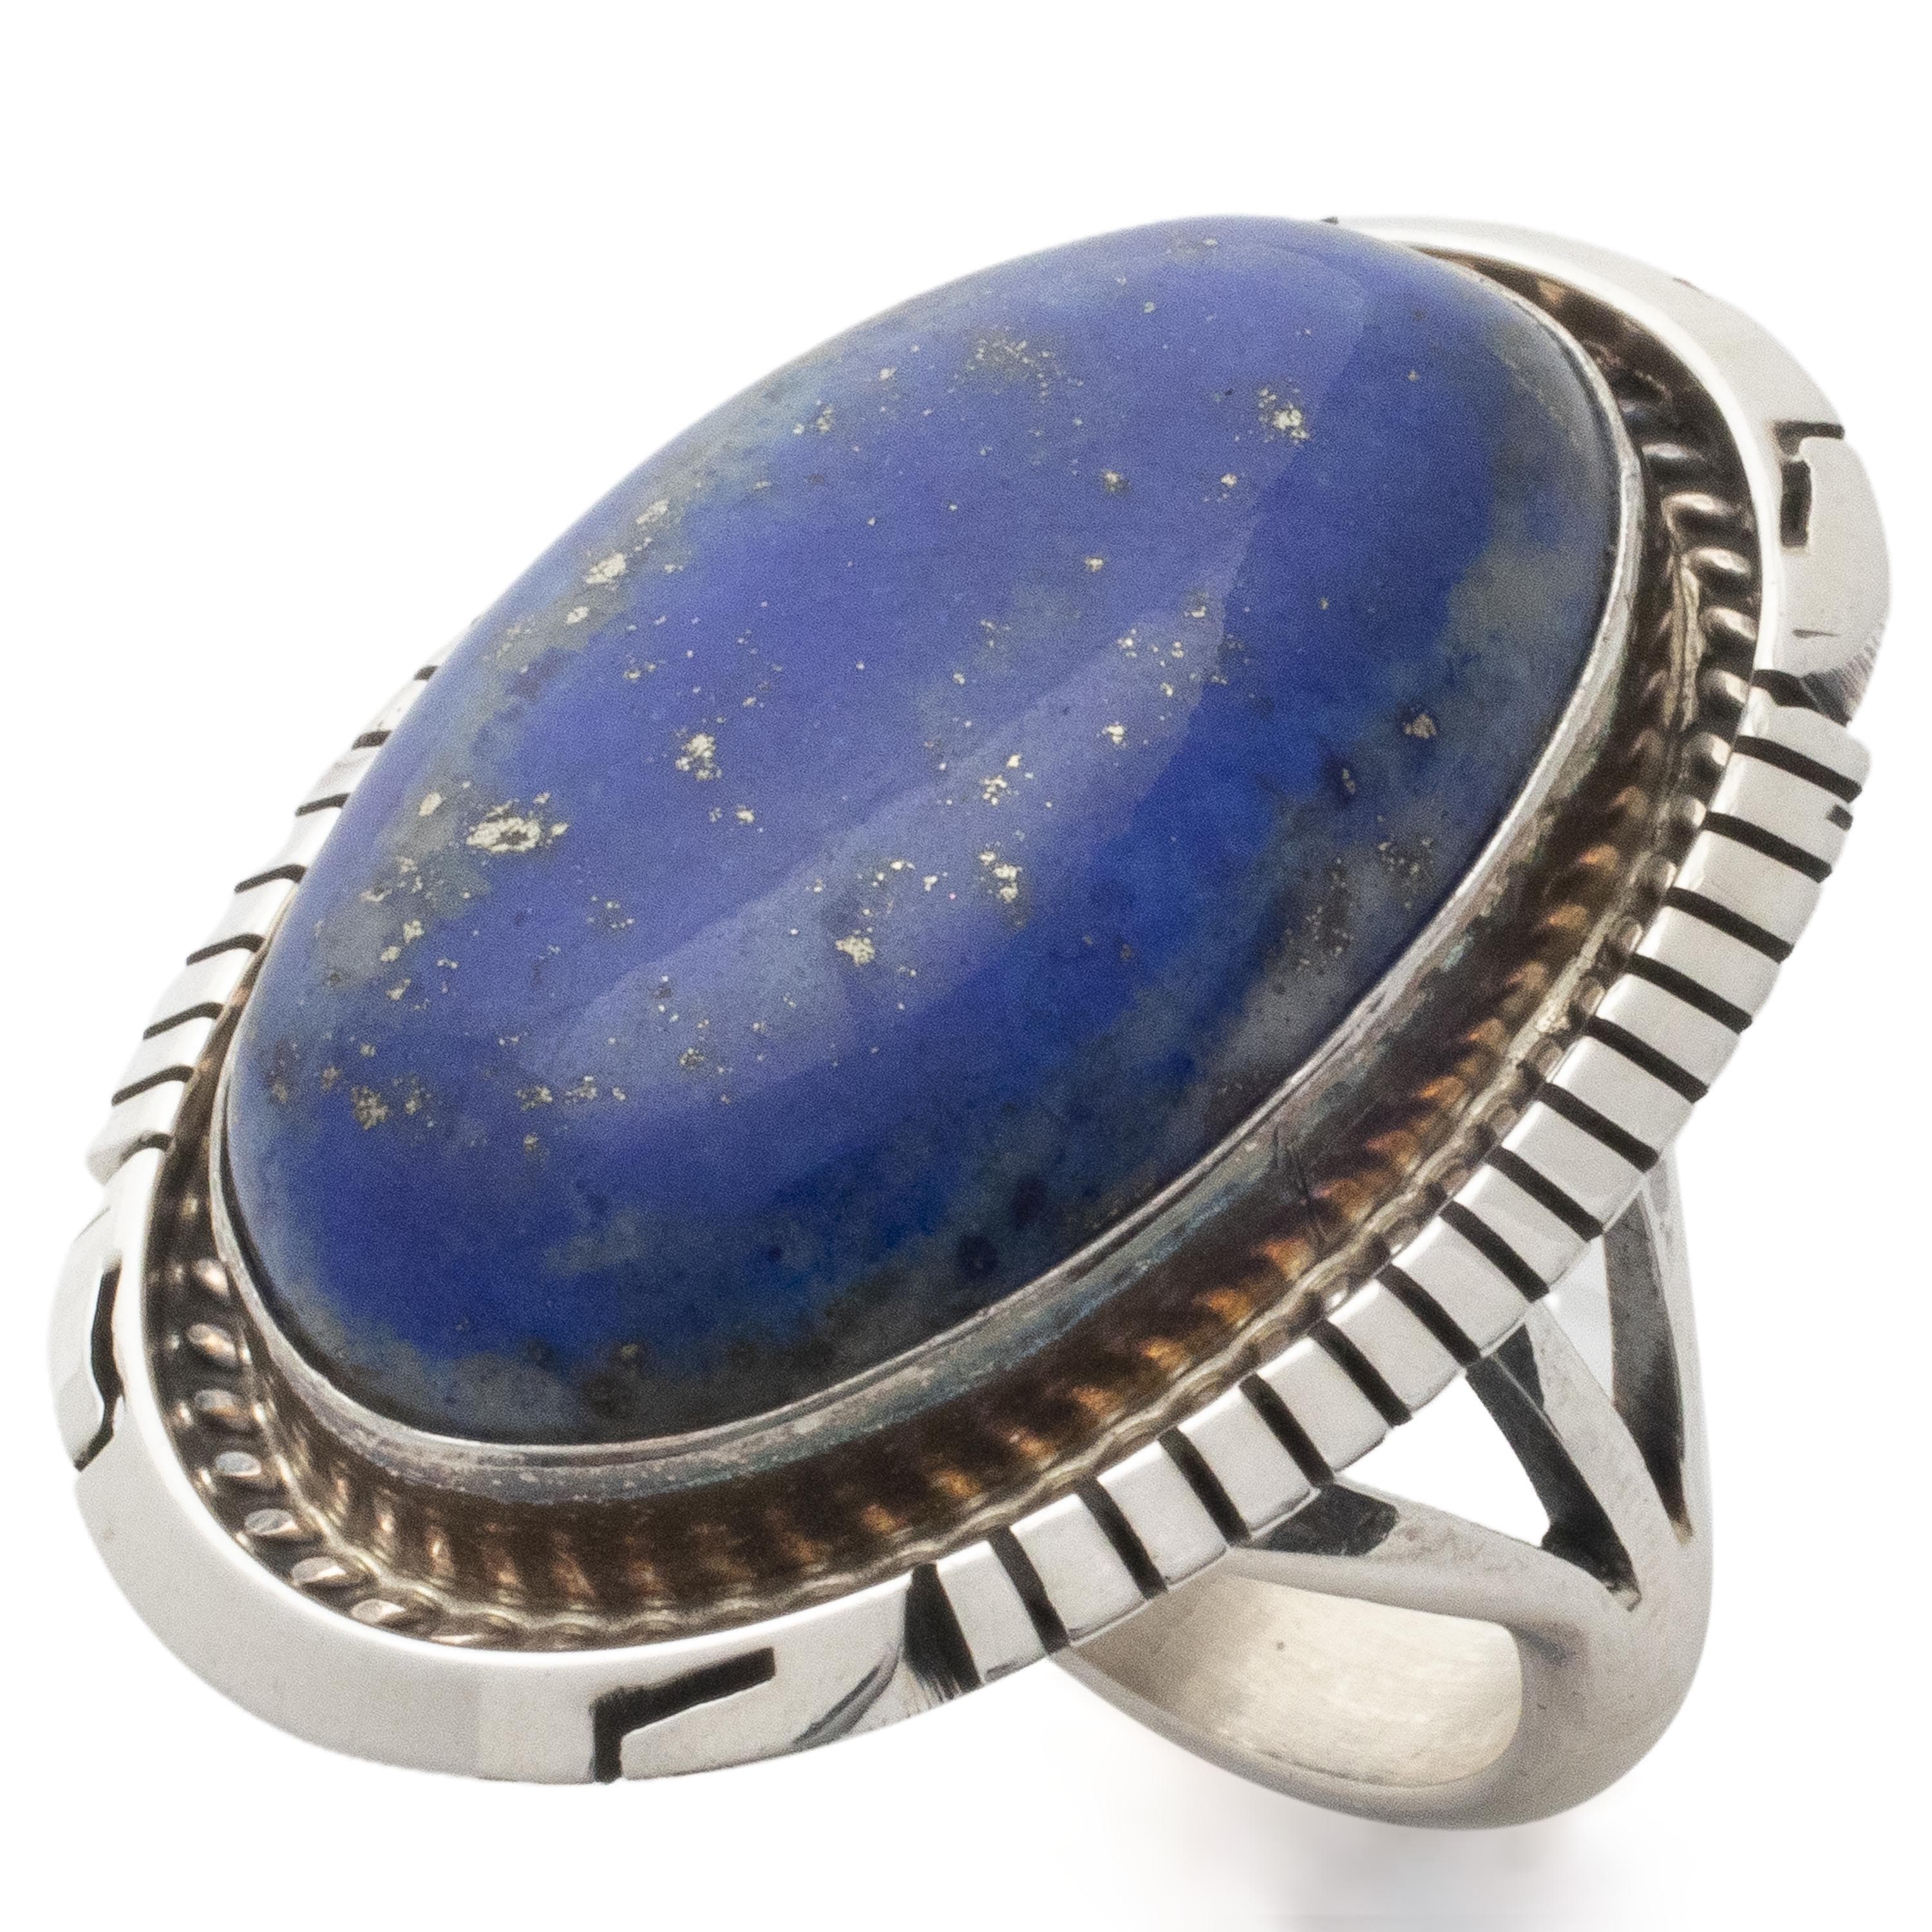 Kalifano Native American Jewelry 6 Alfred Martinez Navajo Lapis USA Native American Made 925 Sterling Silver Ring NAR1200.045.6